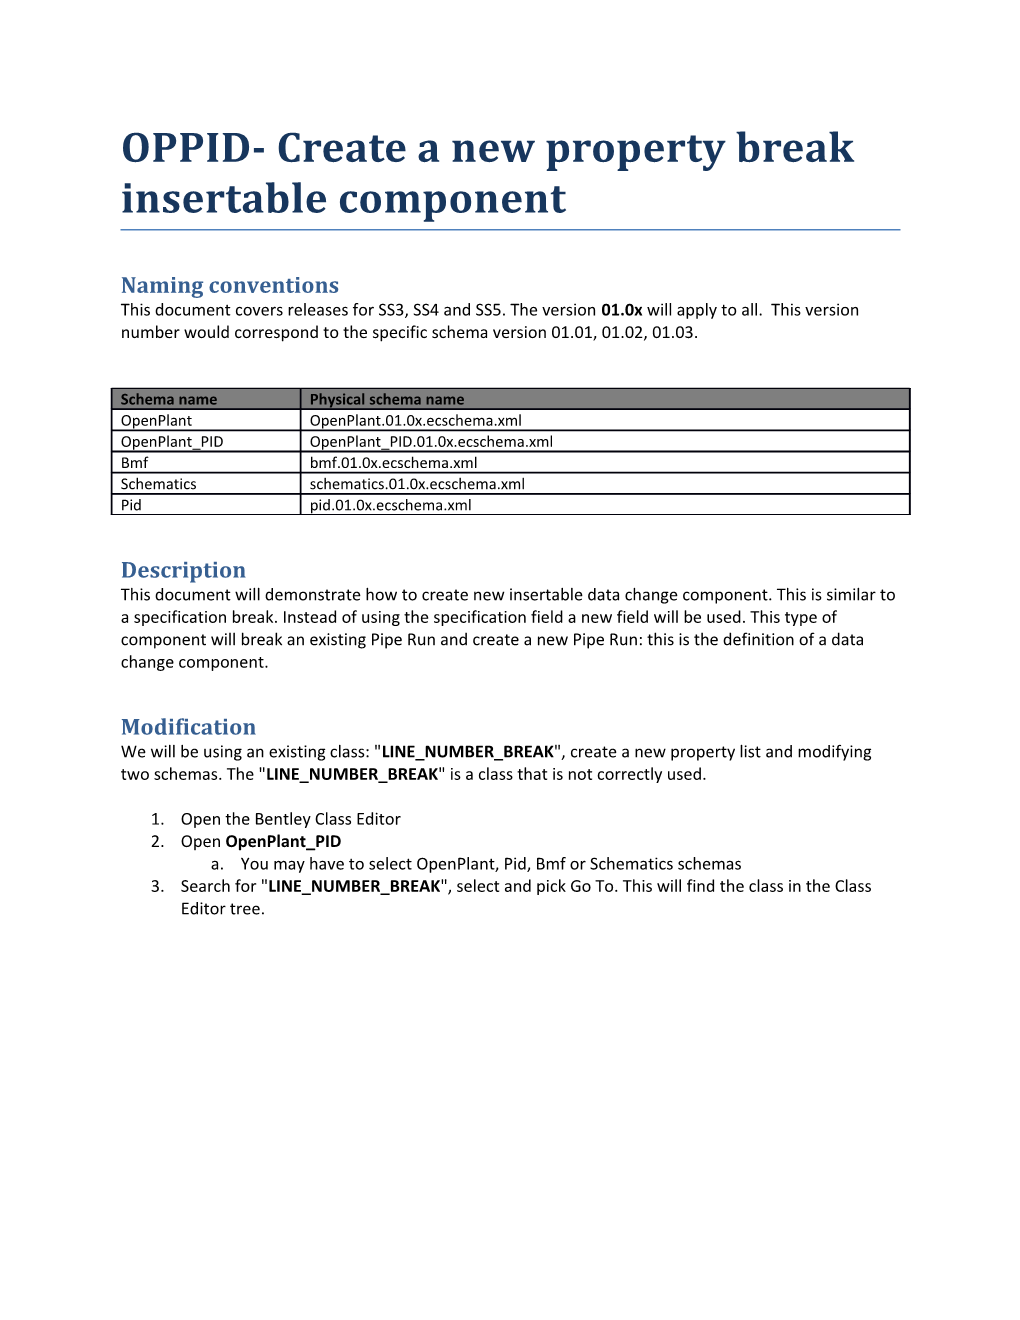 OPPID- Create a New Property Break Insertable Component